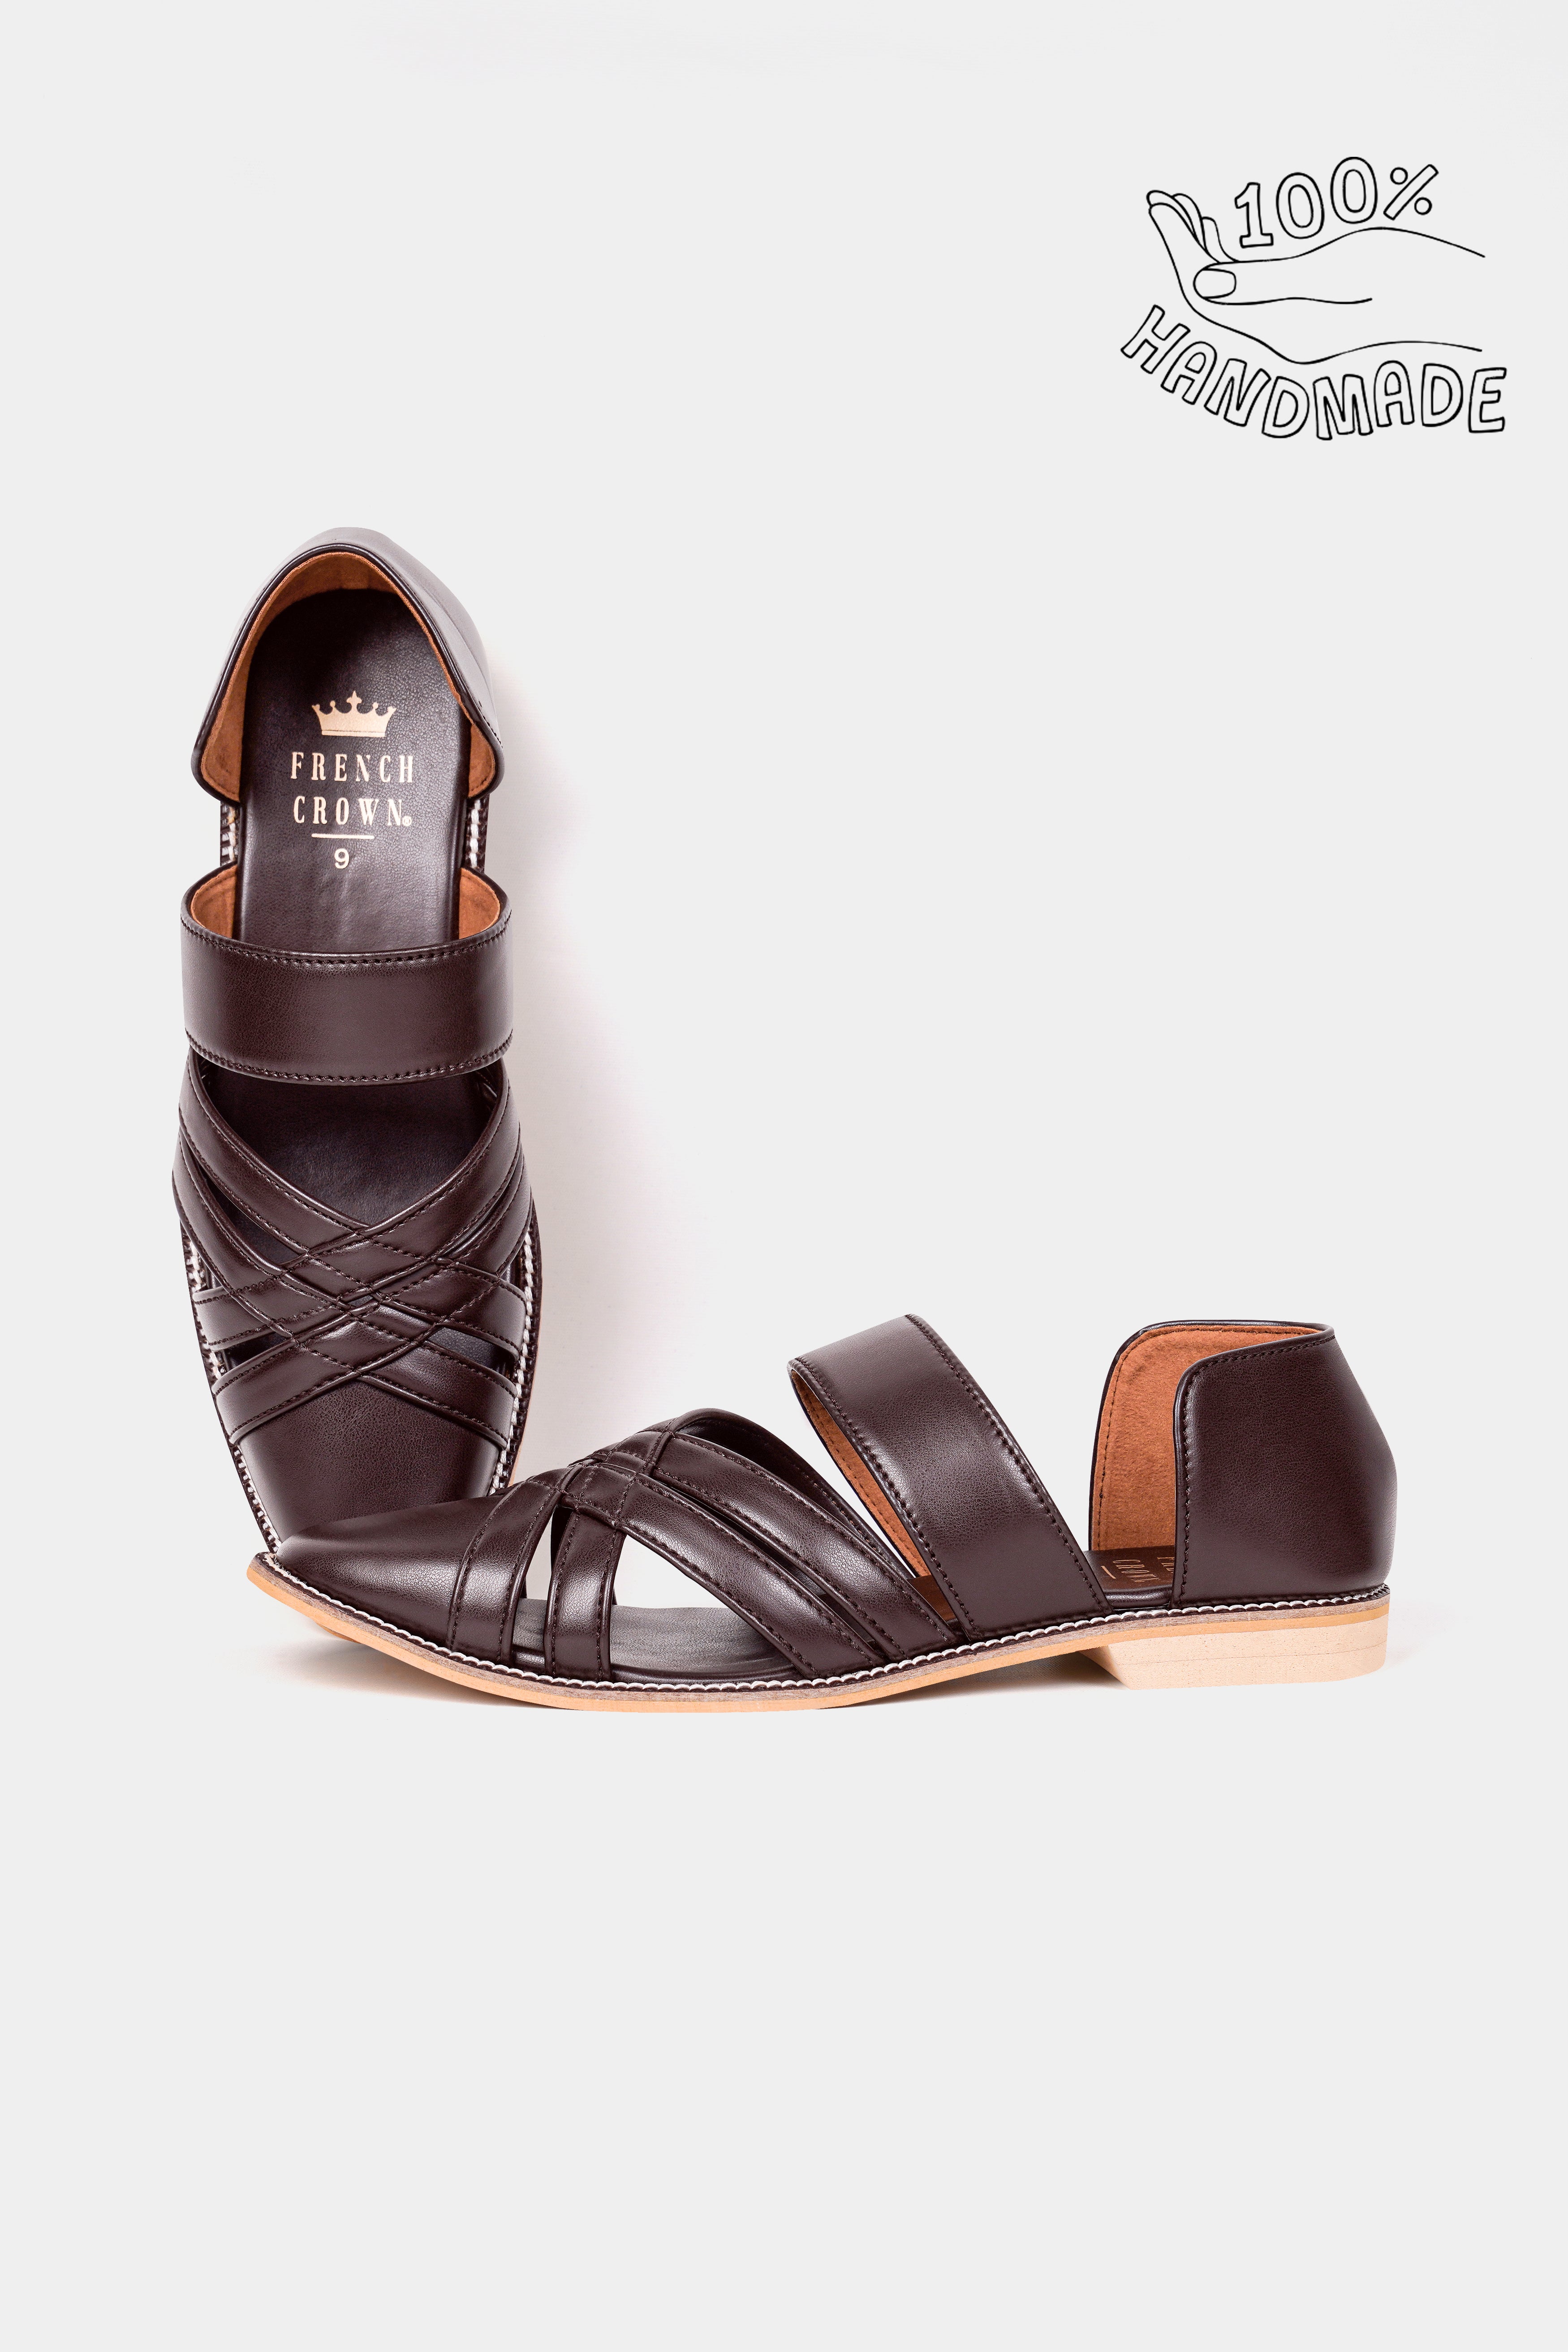 Dark Brown Criss Cross Vegan Leather Hand Stitched Pathanis Sandal FT139-6, FT139-7, FT139-8, FT139-9, FT139-10, FT139-11